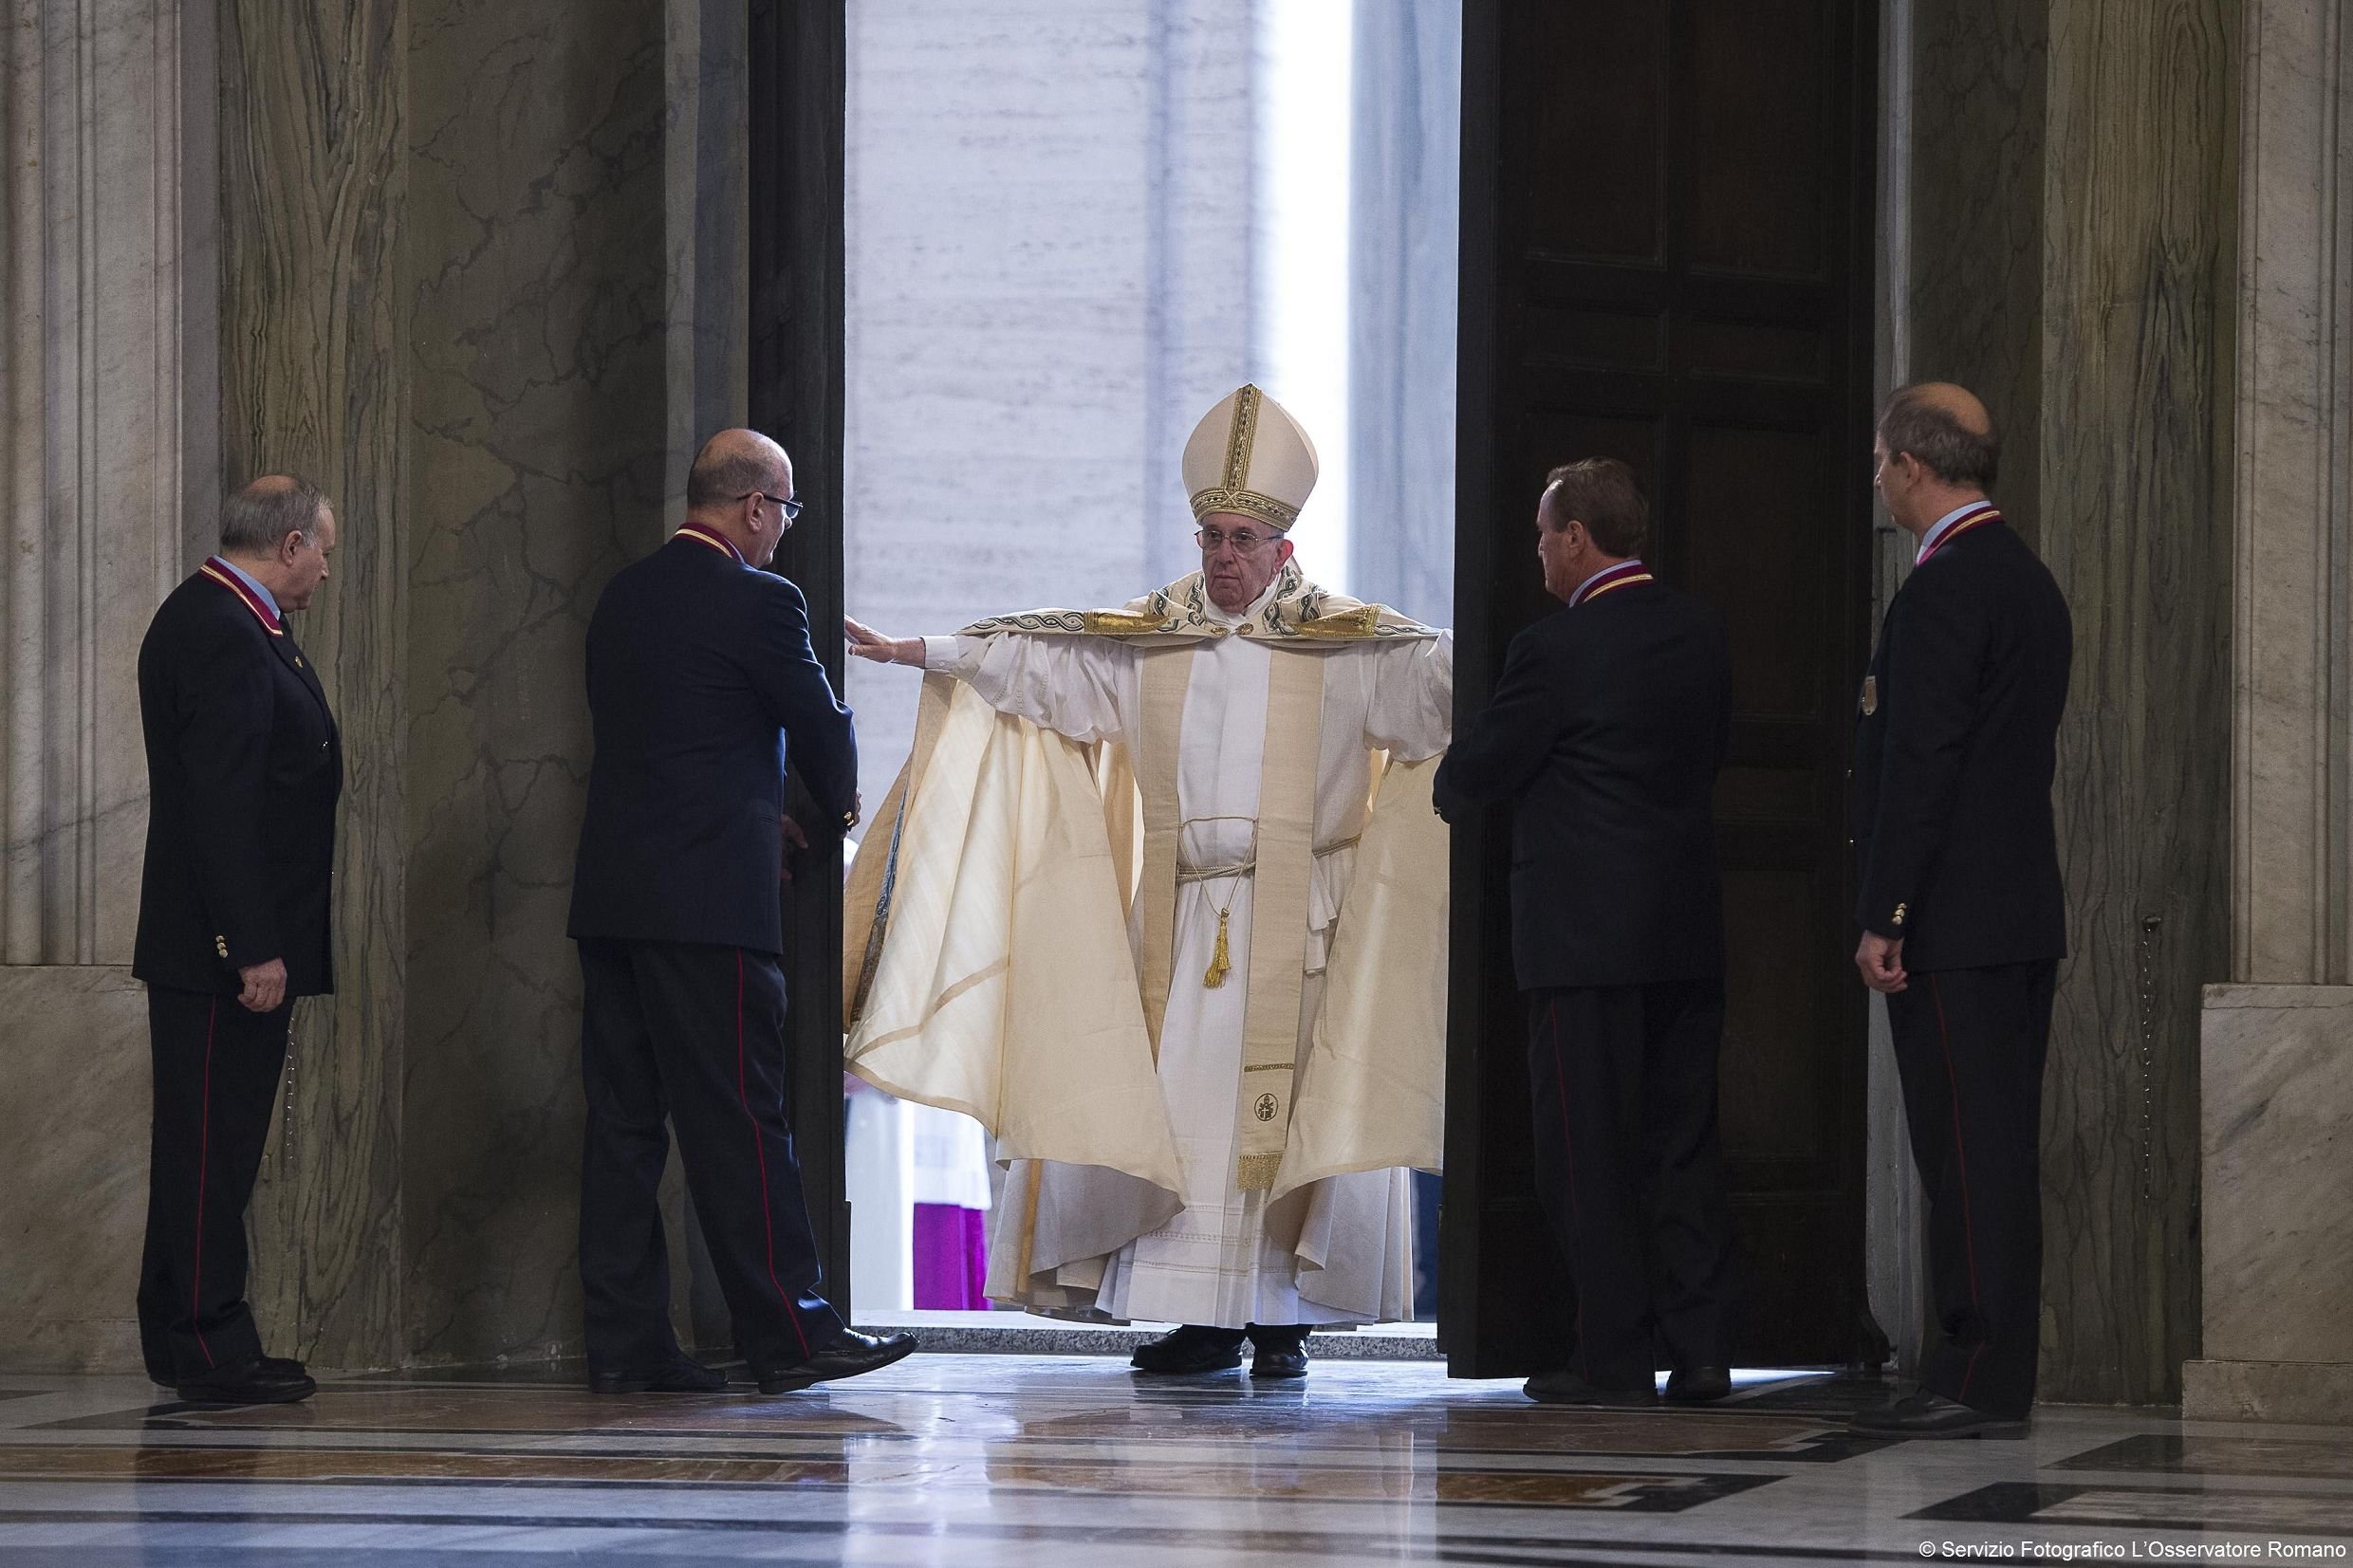 In this 2015 file photo, Pope Francis opens the Holy Door of St. Peter's Basilica to inaugurate the Jubilee Year of Mercy at the Vatican. (CNS photo/L'Osservatore Romano, handout)